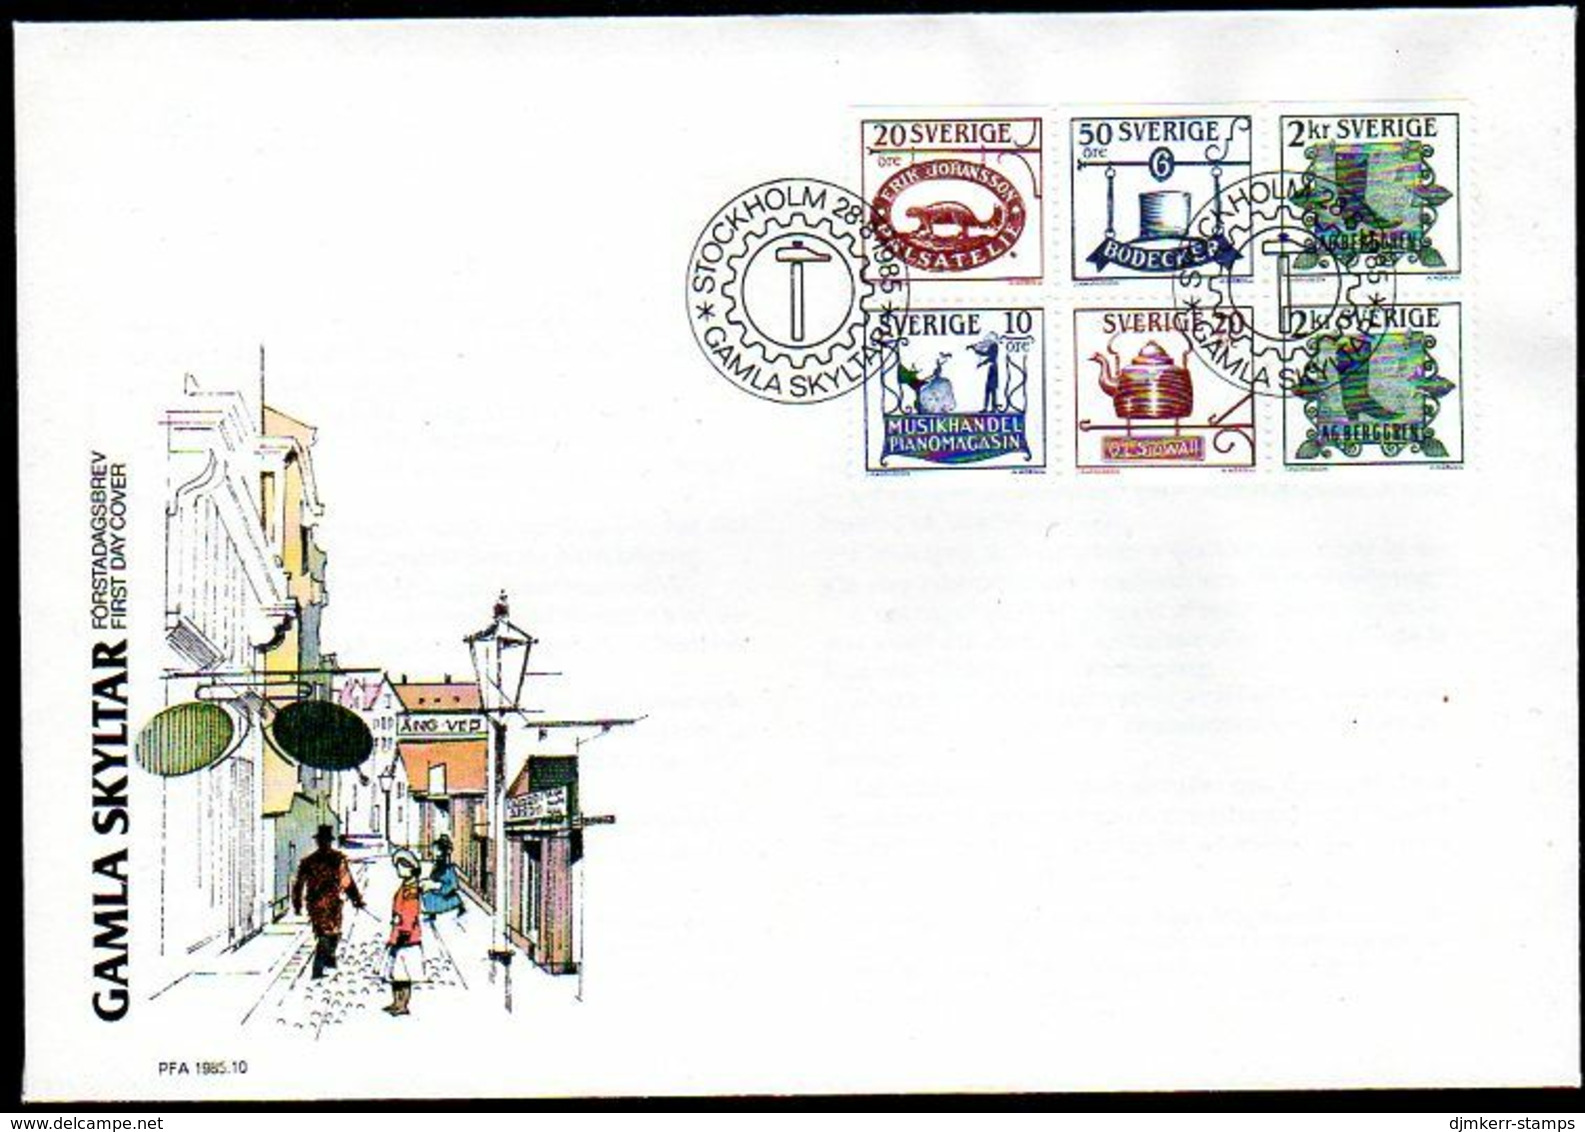 SWEDEN 1985 Old Trade Signs FDC. Michel 1342-46 - FDC